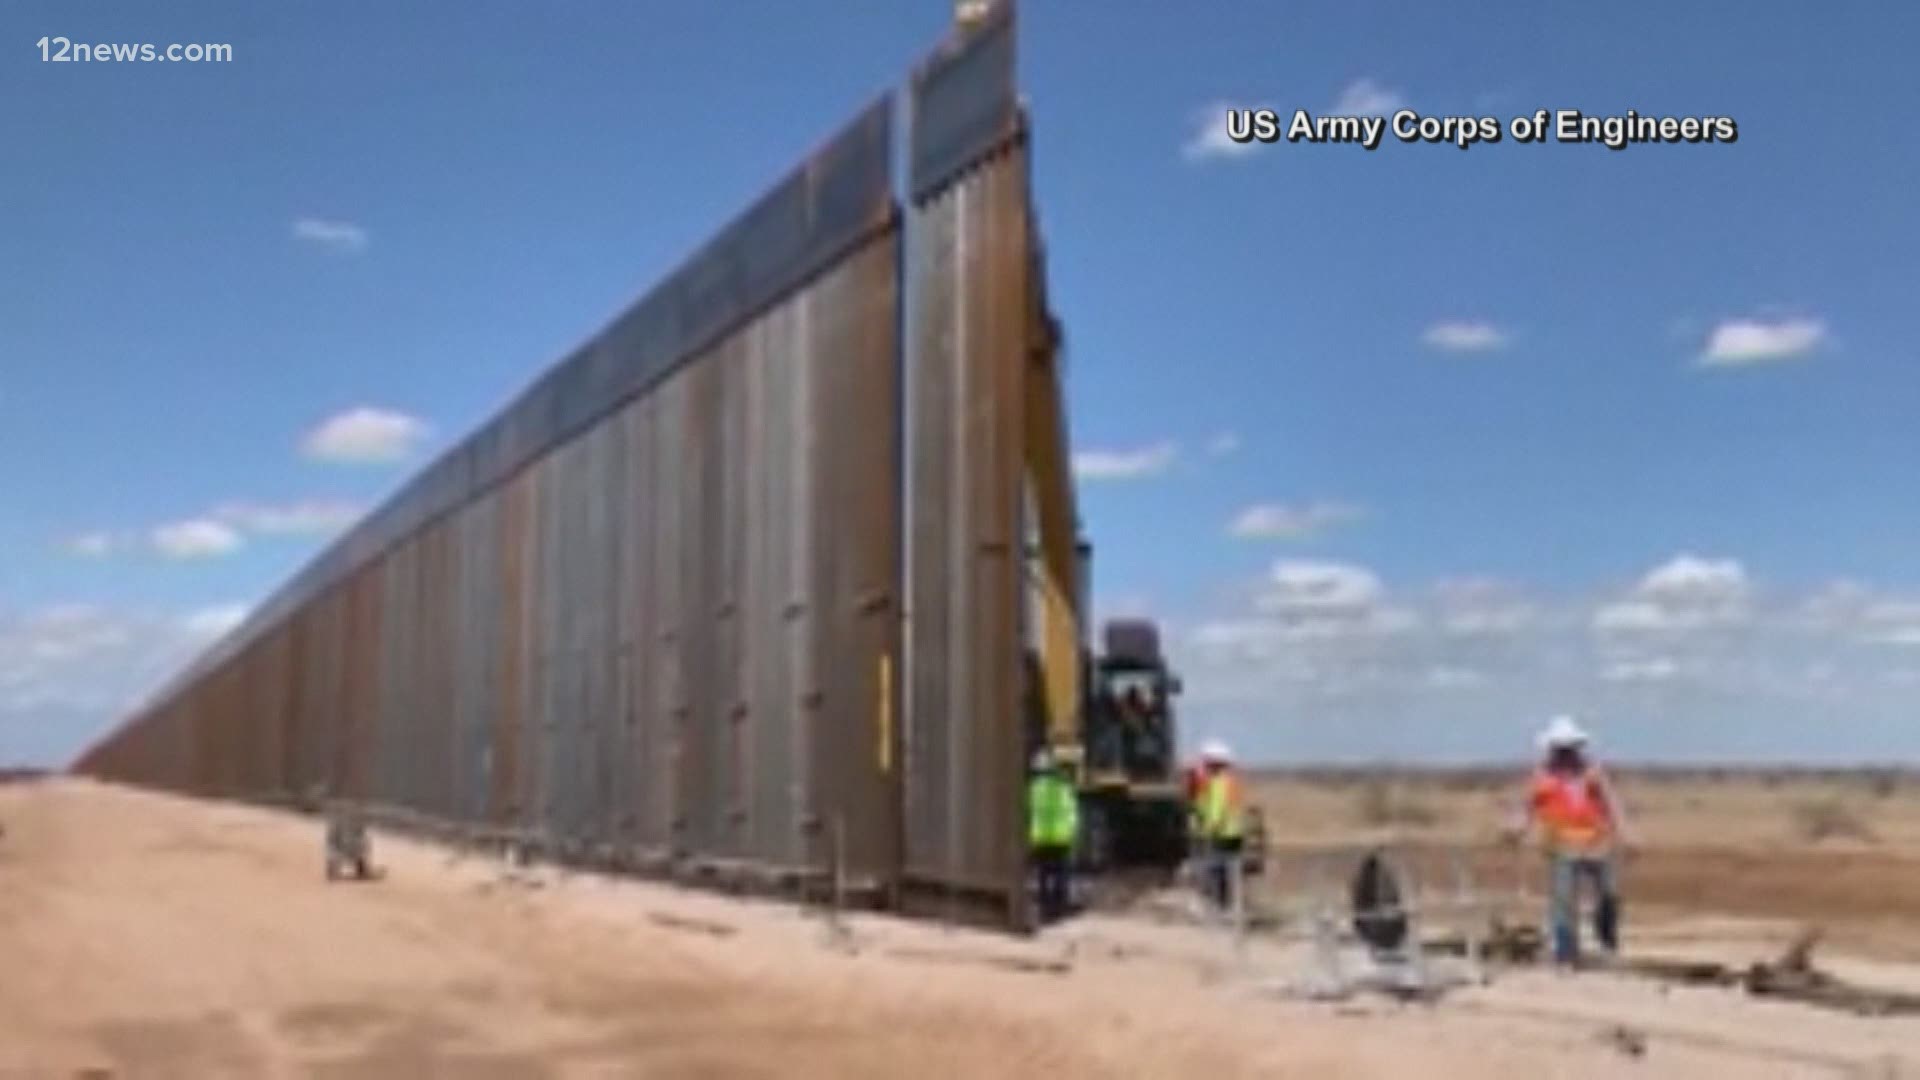 A ceremony in Texas on Thursday commemorated 400 miles of new border wall constructed under President Trump. 12 News verifies if the claim is true.